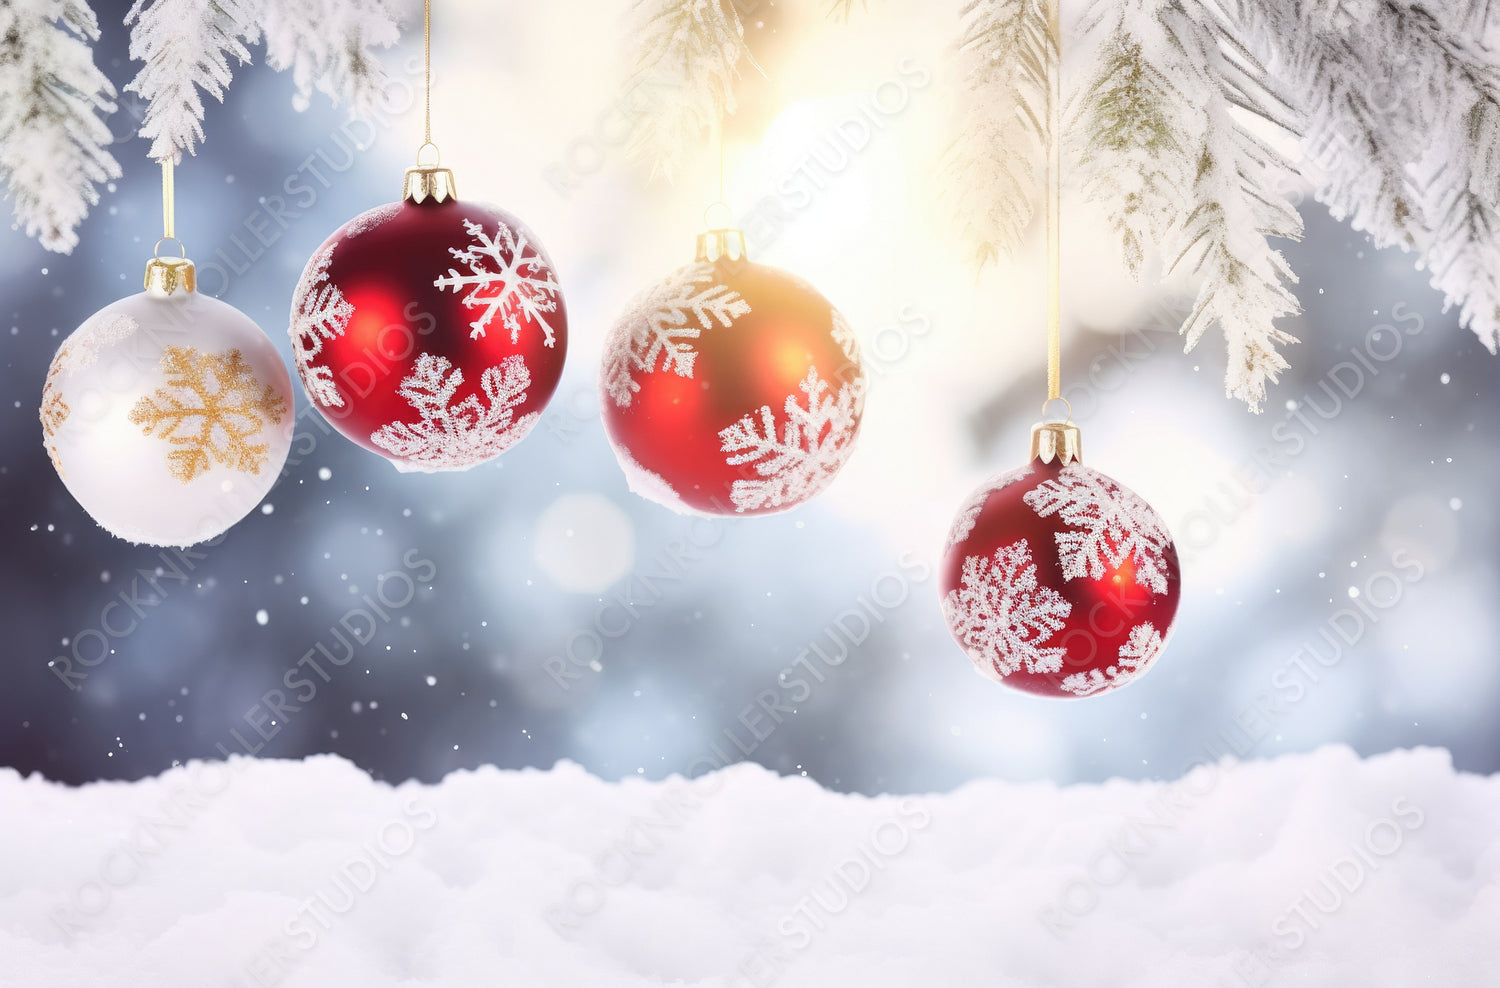 Christmas decoration with red and white Christmas balls, snowflakes in snow and snow covered fir branches in sunny day. Cozy warm solar tones, copy space.